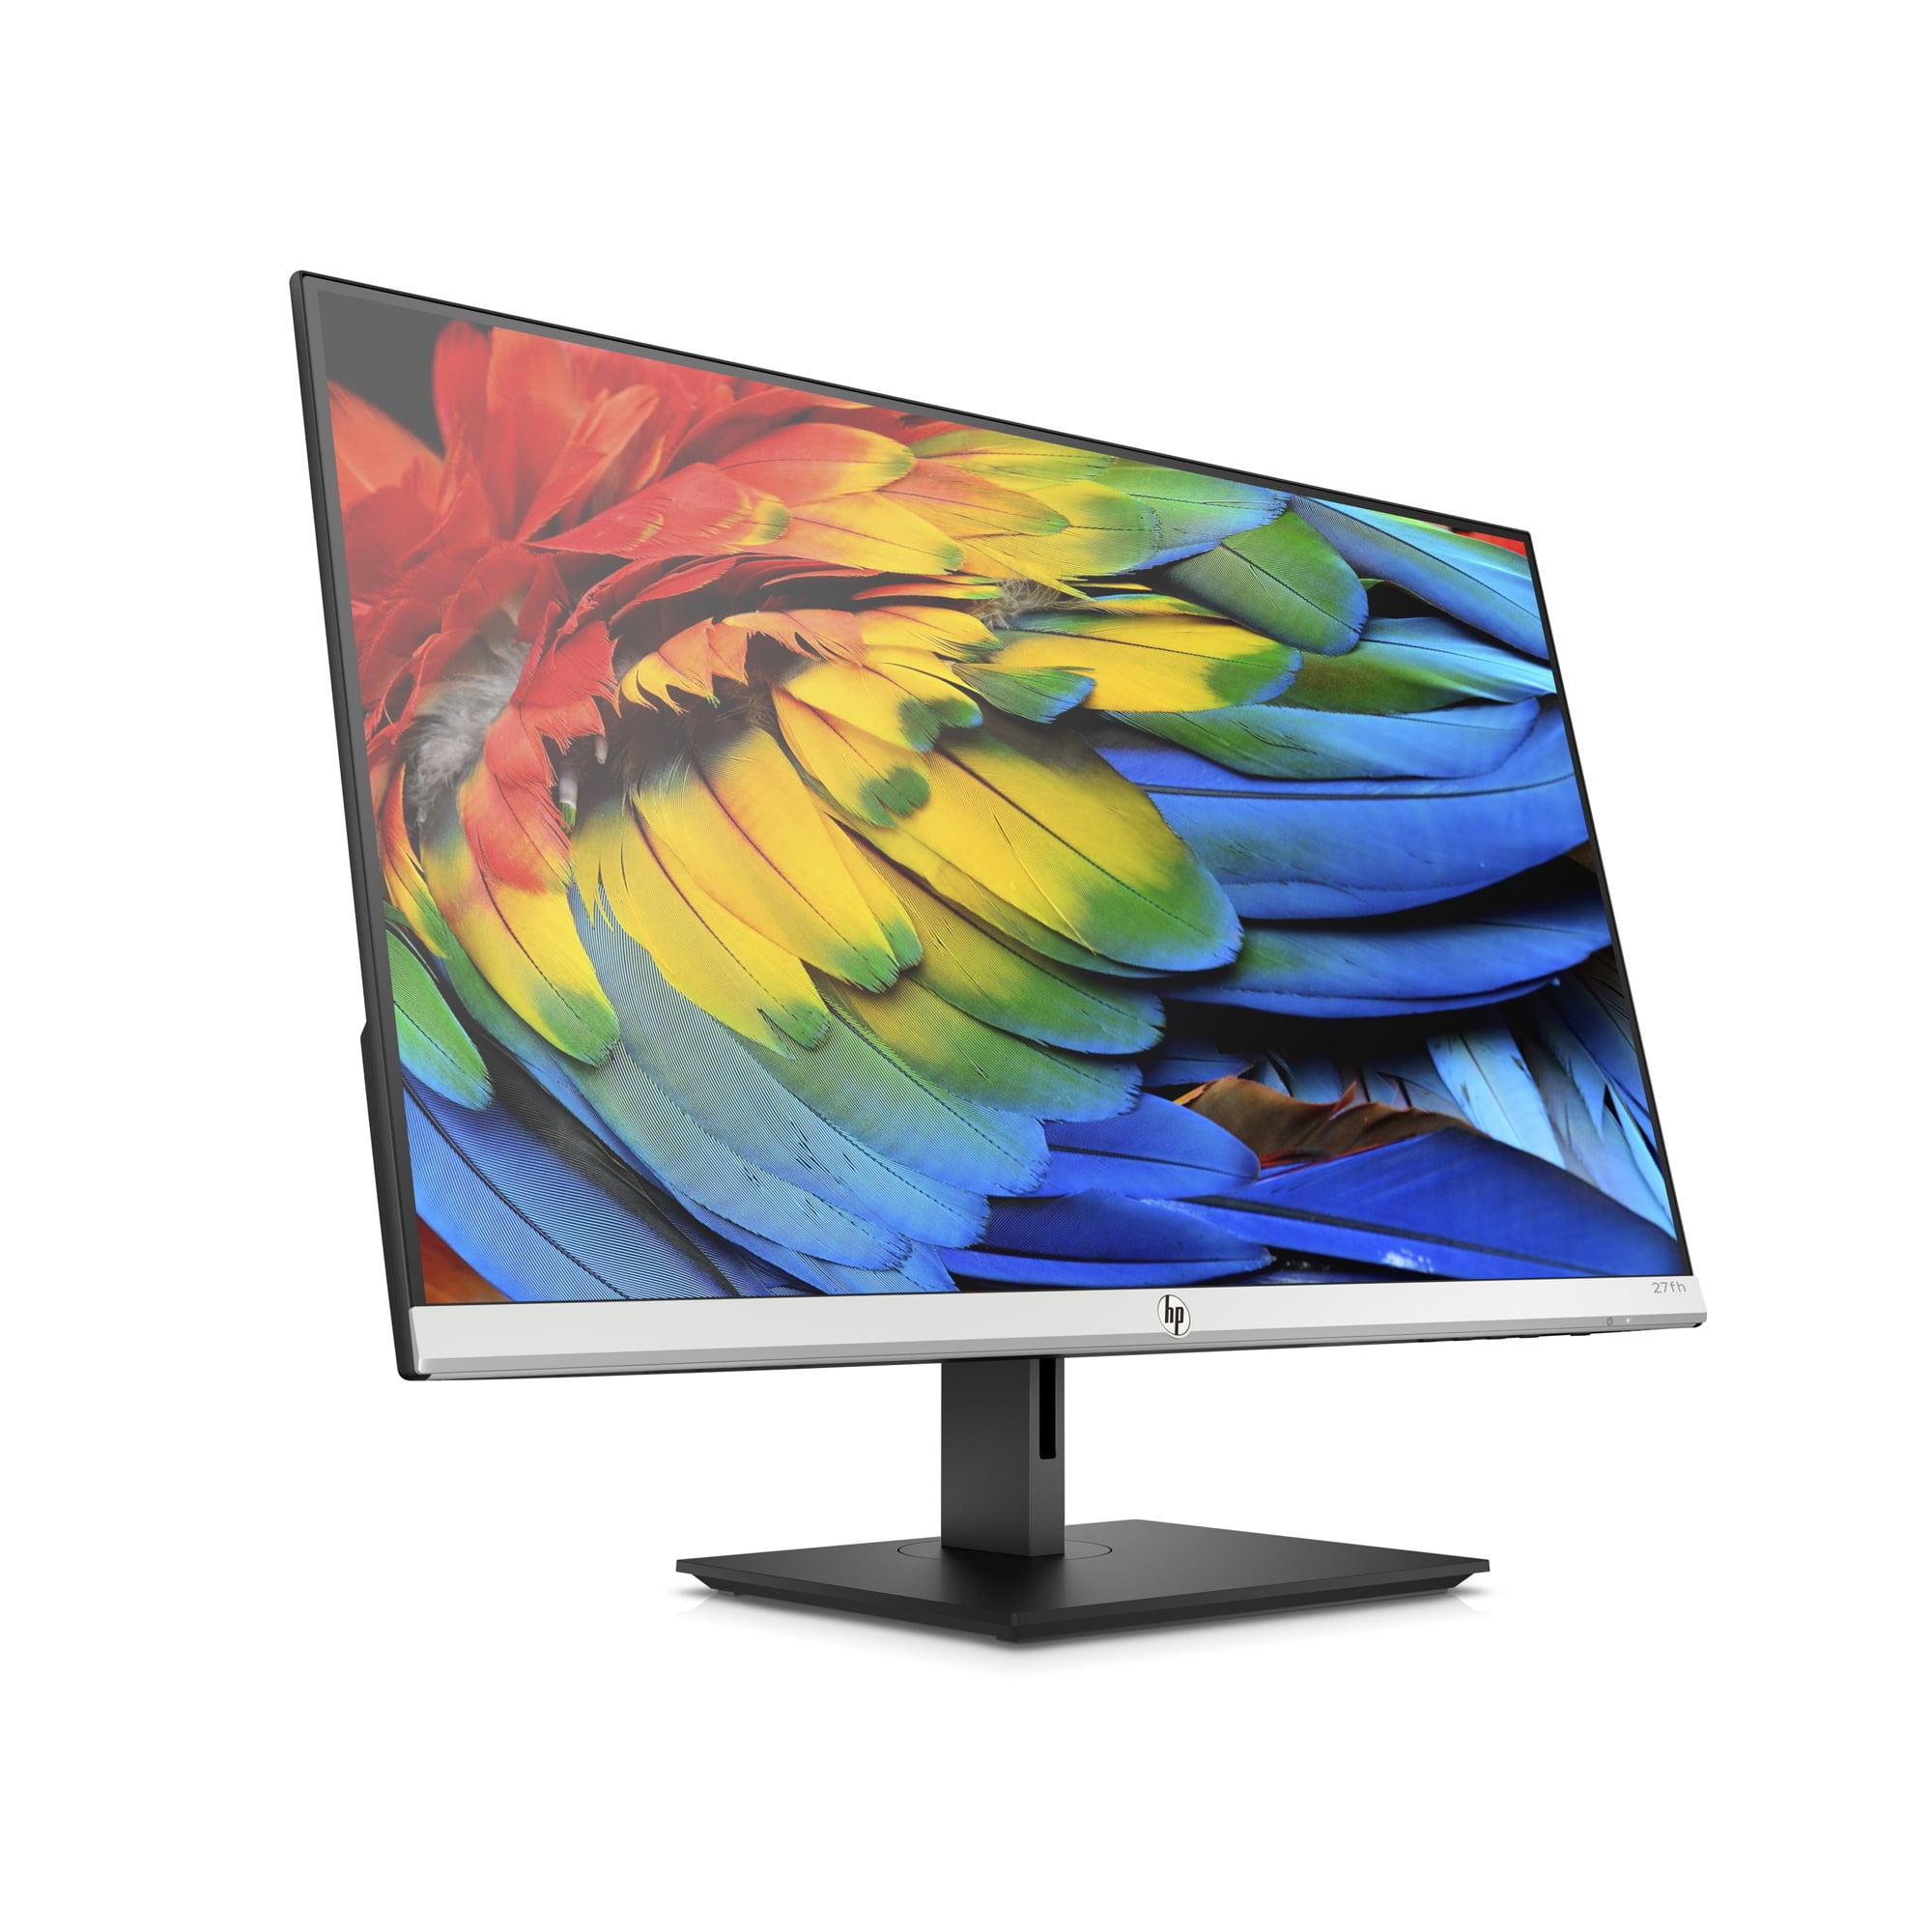 HP 27FH 27-inch Monitor, 1920 x 1080, 1000:1 Static Ratio, 5ms Response  Time, IPS w/ LED backlight, Black